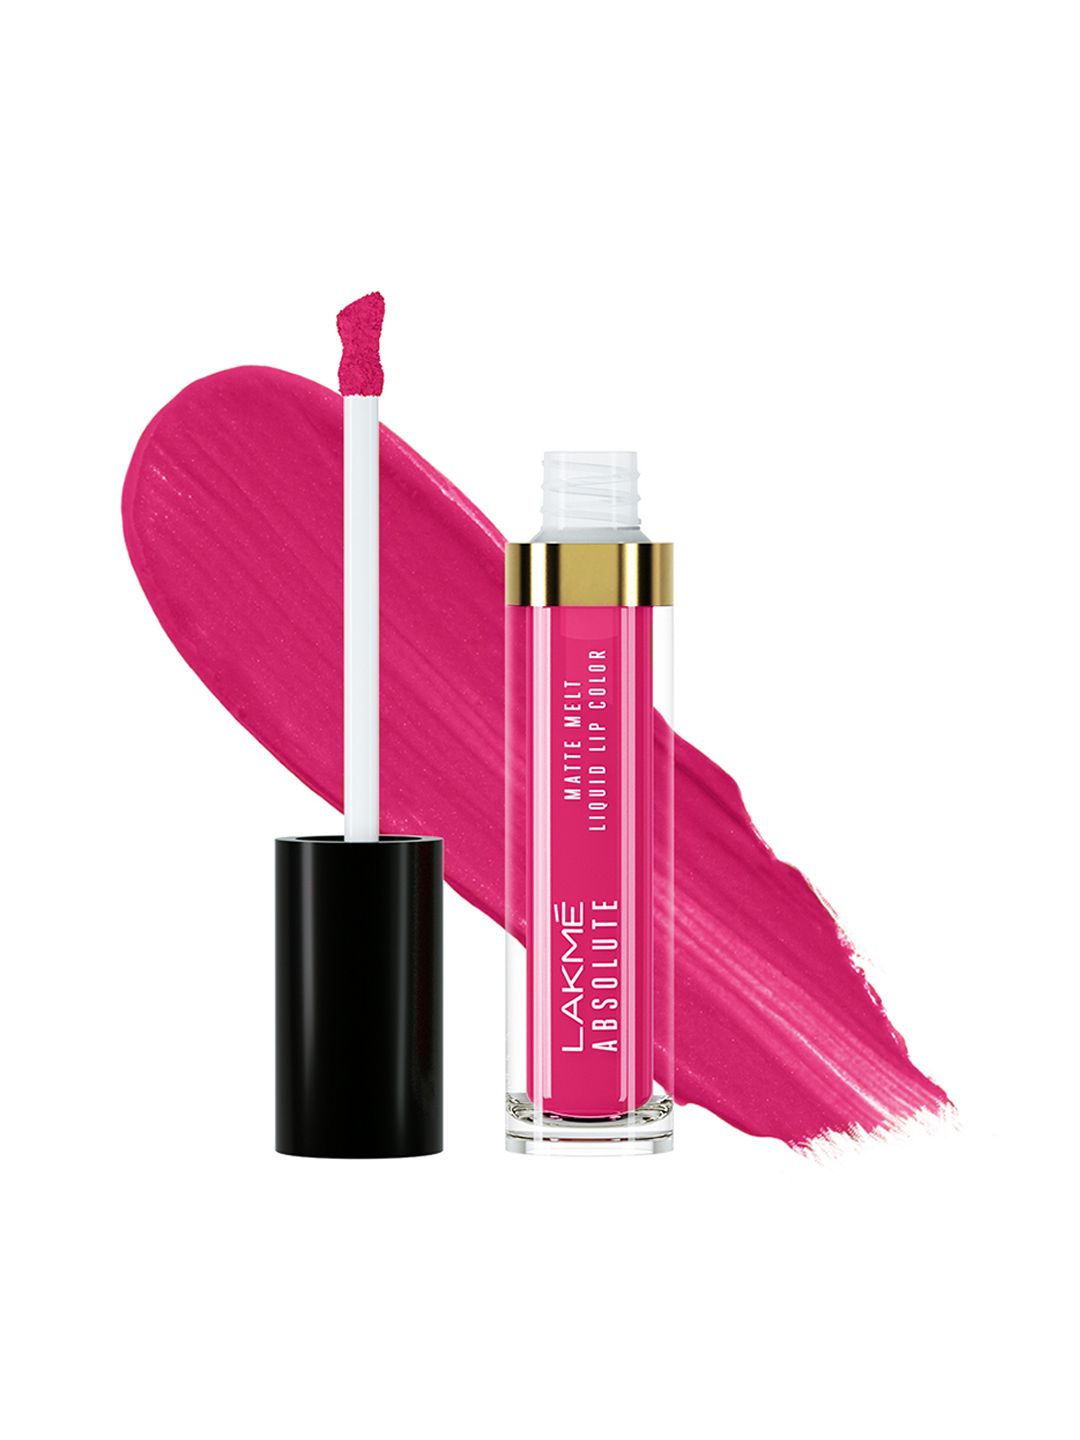 Lakme Absolute Matte Melt Liquid Lip Color - Blushing Pink 234 Price in India